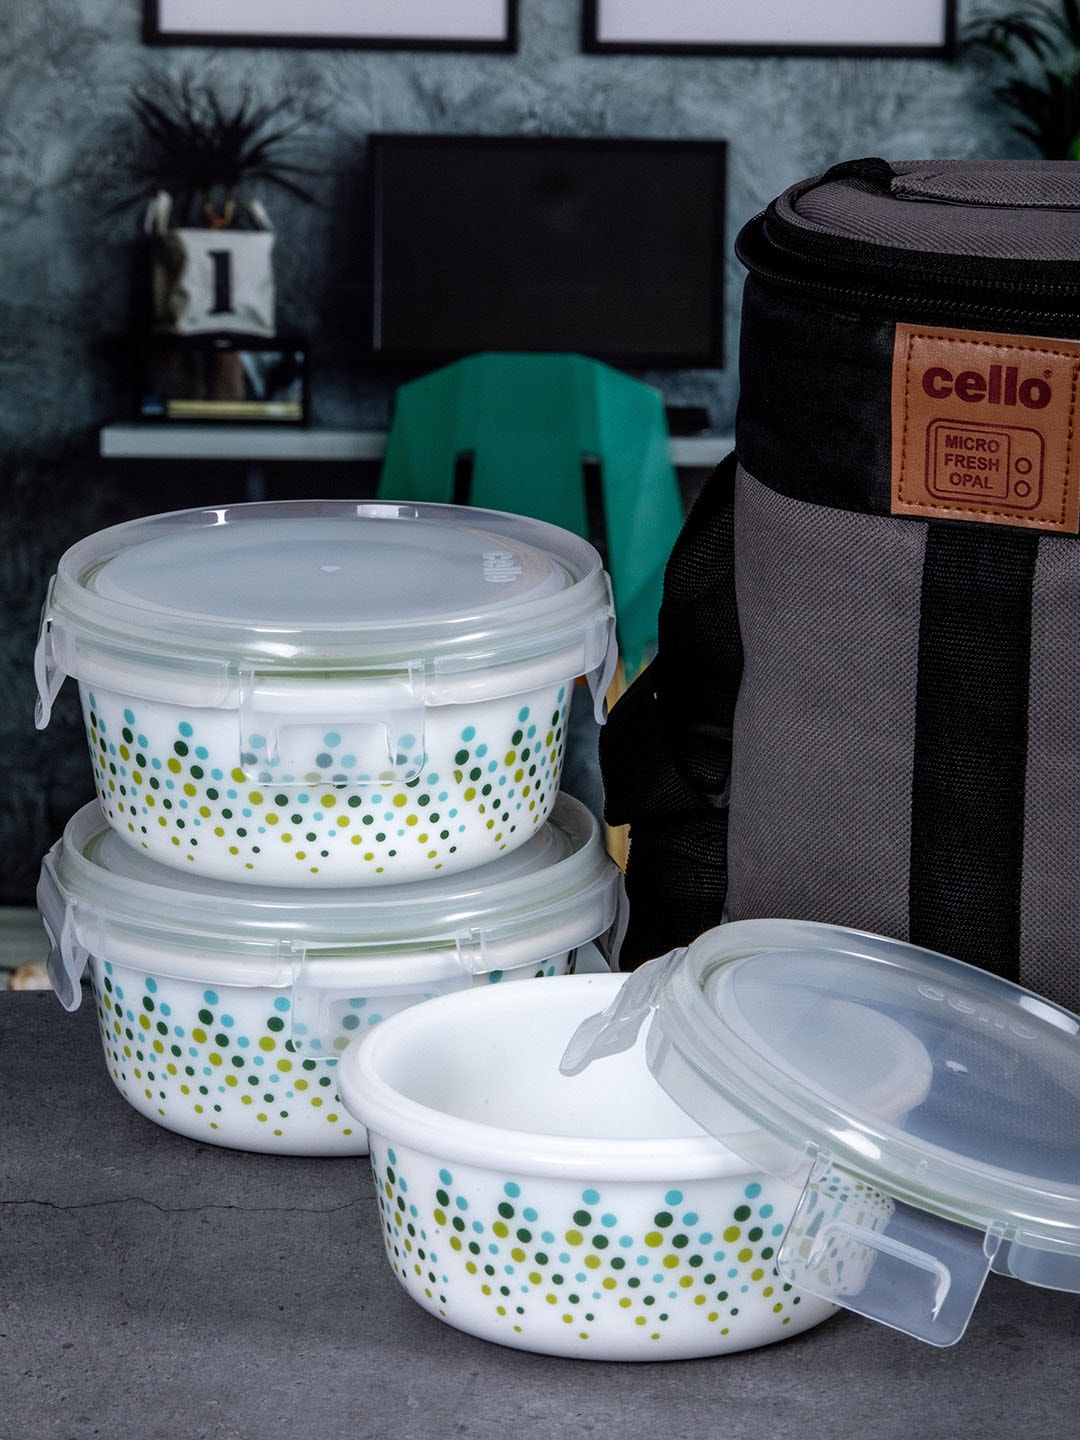 Cello White Printed Lunch Box With Lunch Bag Price in India